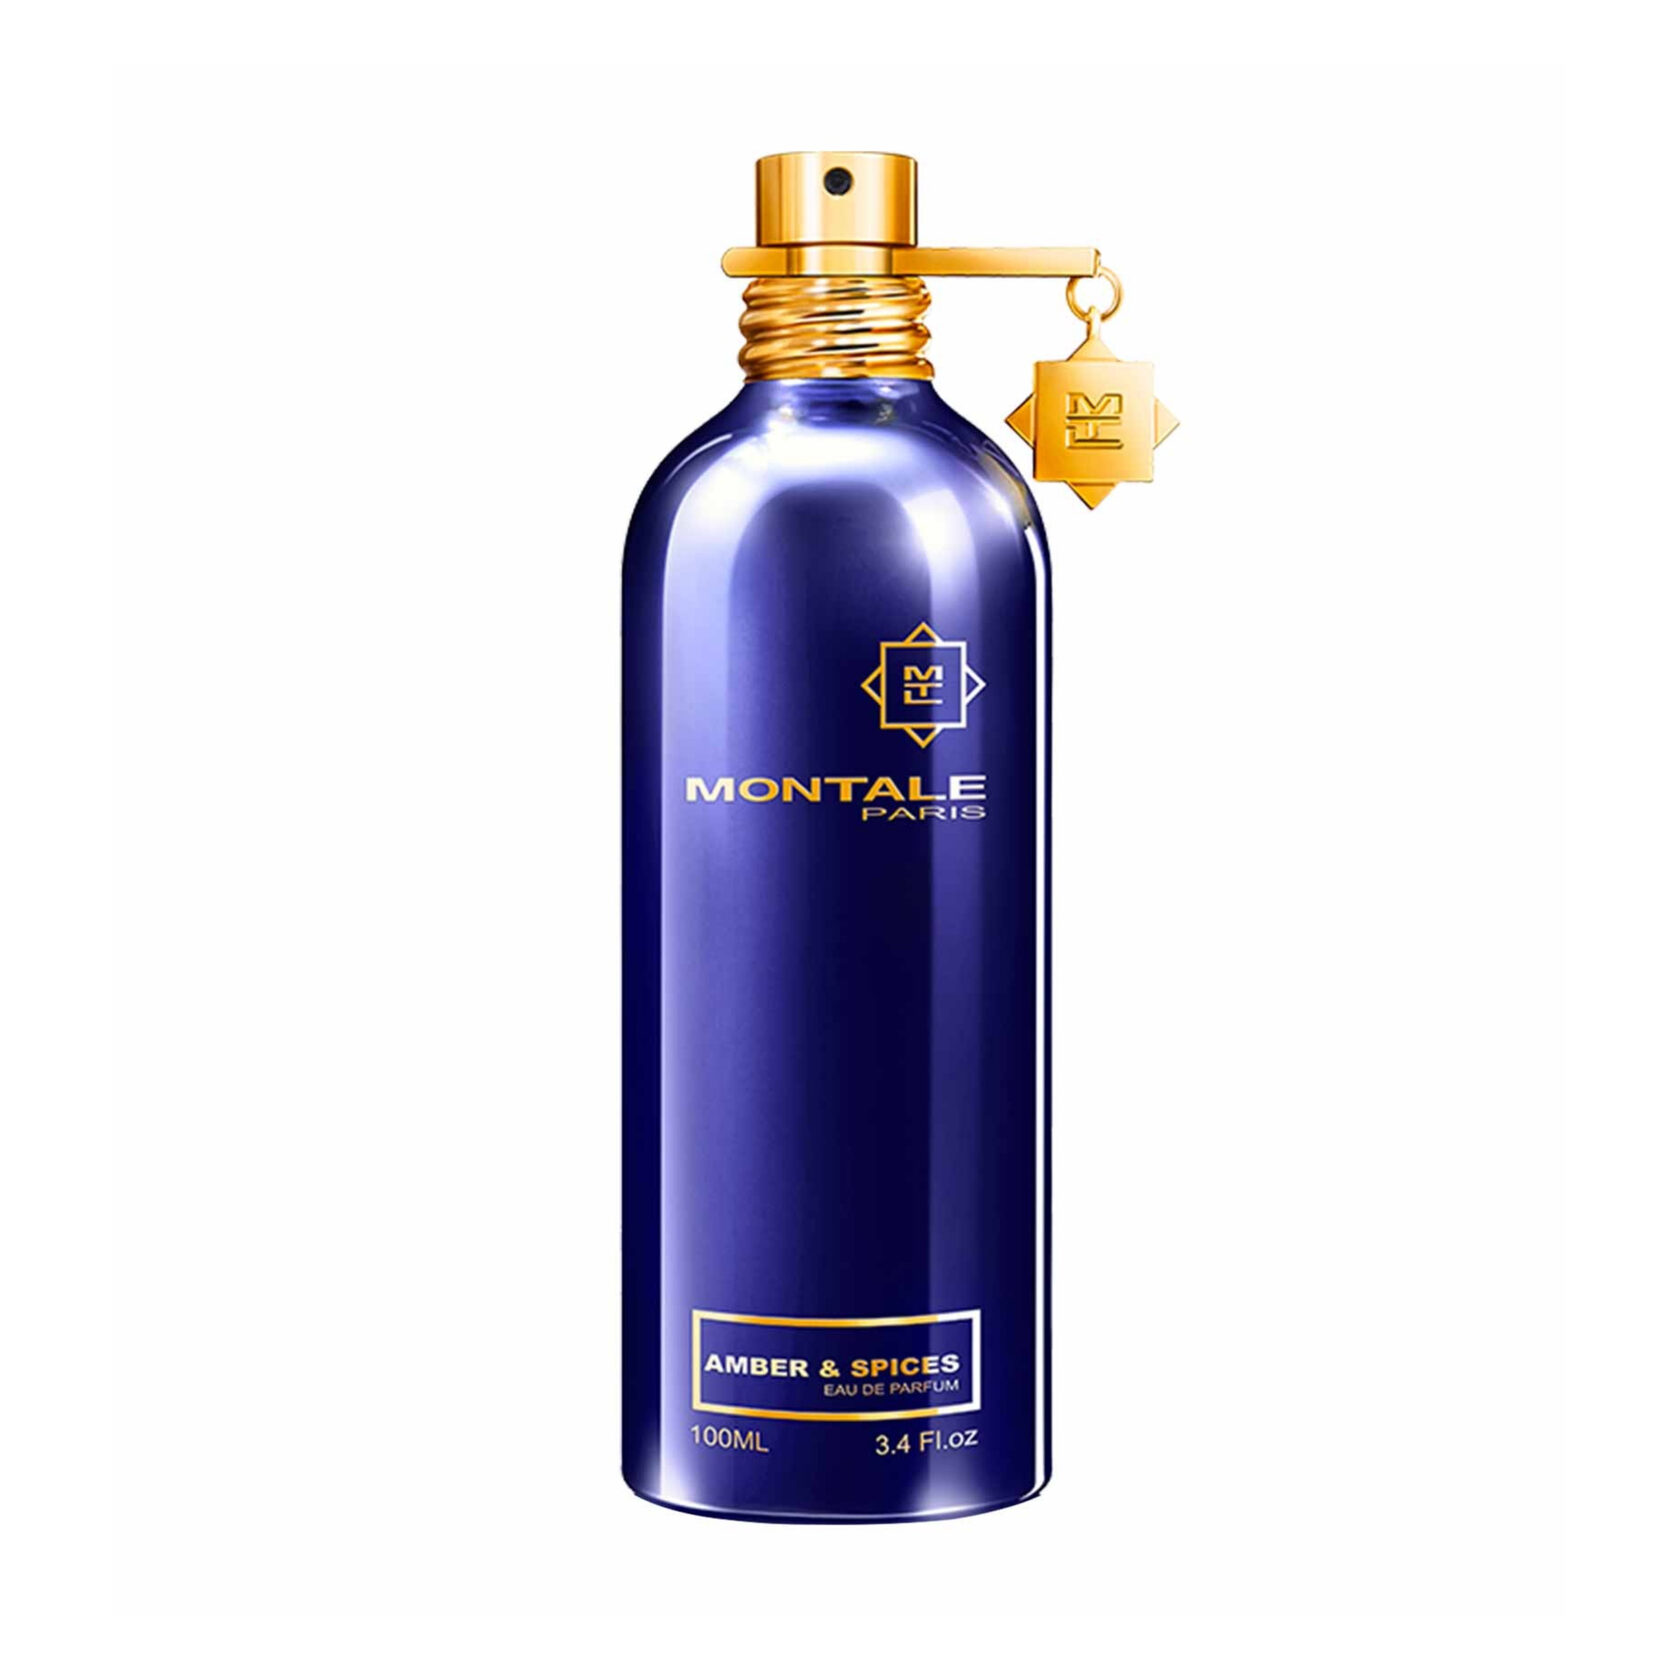 Montale 100ml. Montale Amber & Spices EDP 50 ml. Montale Amber & Spices 100ml. Montale Aoud Amber EDP, 100ml. Montale Blue Amber EDP.